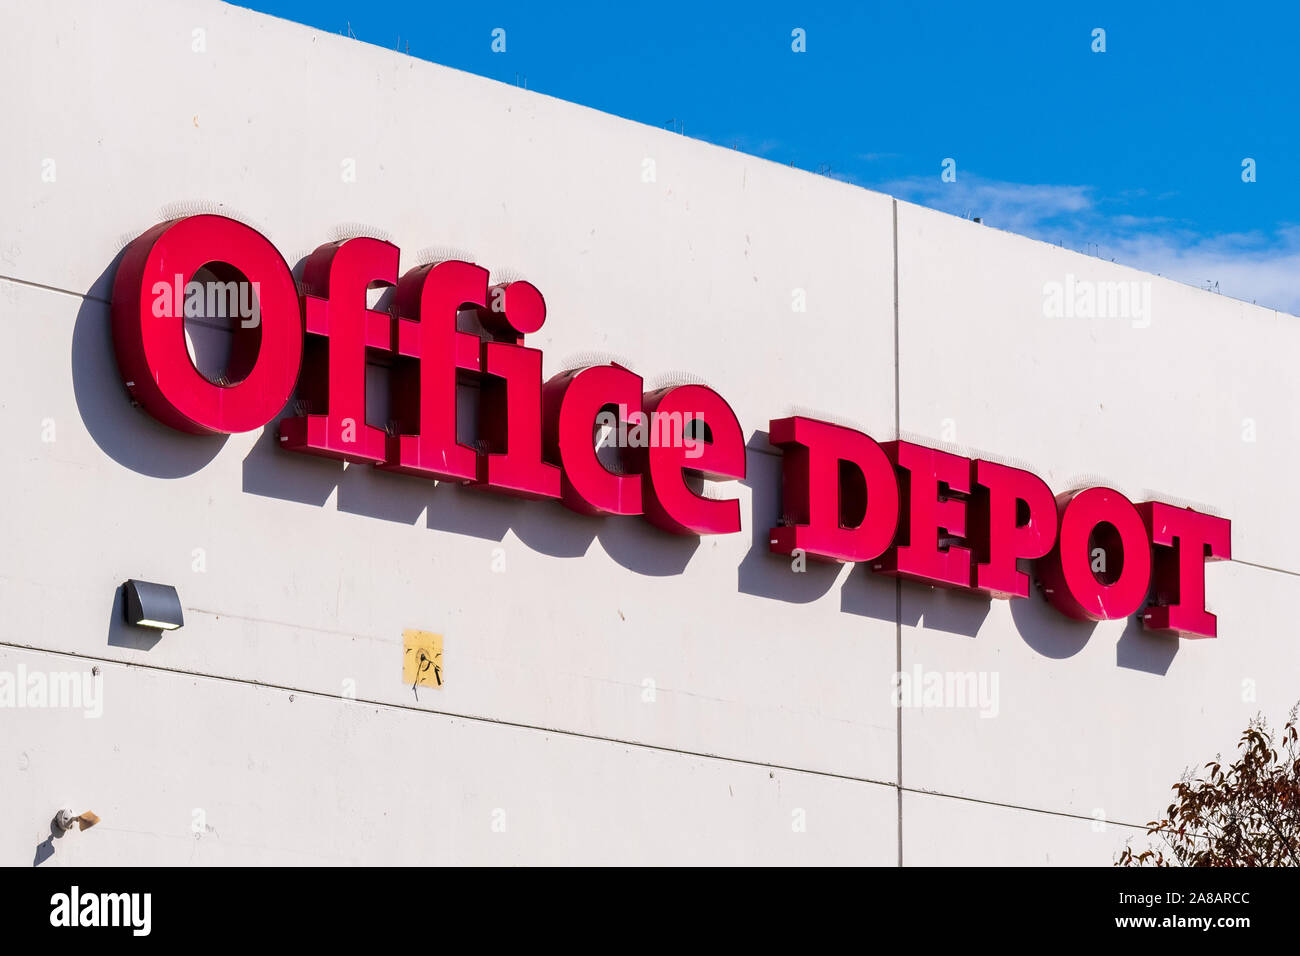 Oct 18, 2019 Emeryville / CA / USA - Office Depot logo at one of their locations in San Francisco bay area; Office Depot, Inc. is an American office s Stock Photo